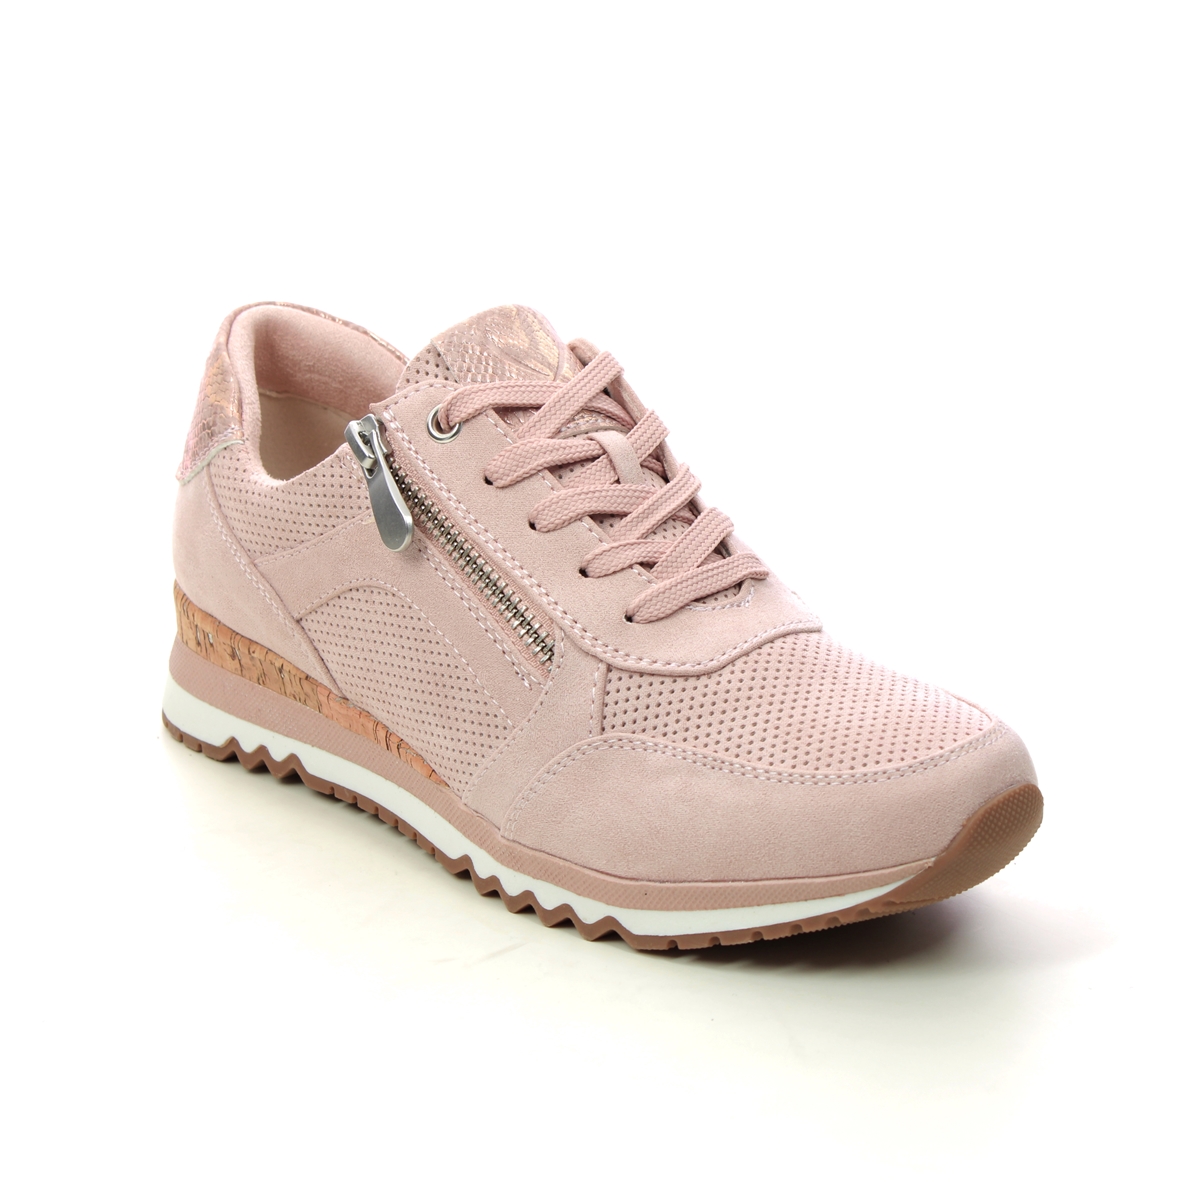 Marco Tozzi Bonallo Cork Rose Pink Womens Trainers 23781-20-523 In Size 40 In Plain Rose Pink